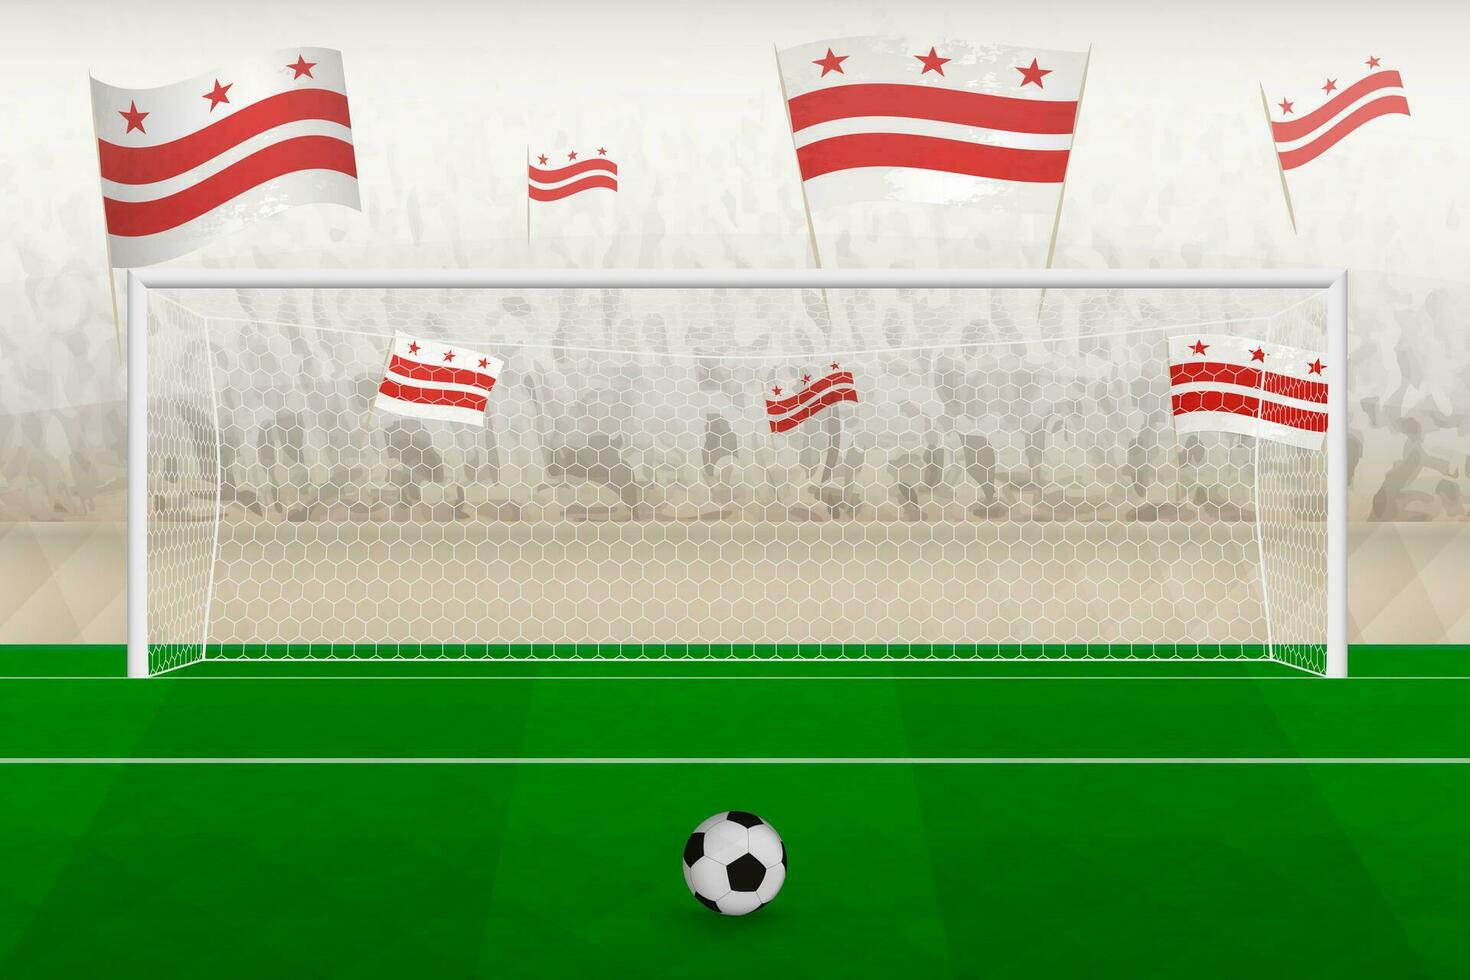 District of Columbia football team fans with flags of District of Columbia cheering on stadium, penalty kick concept in a soccer match. vector